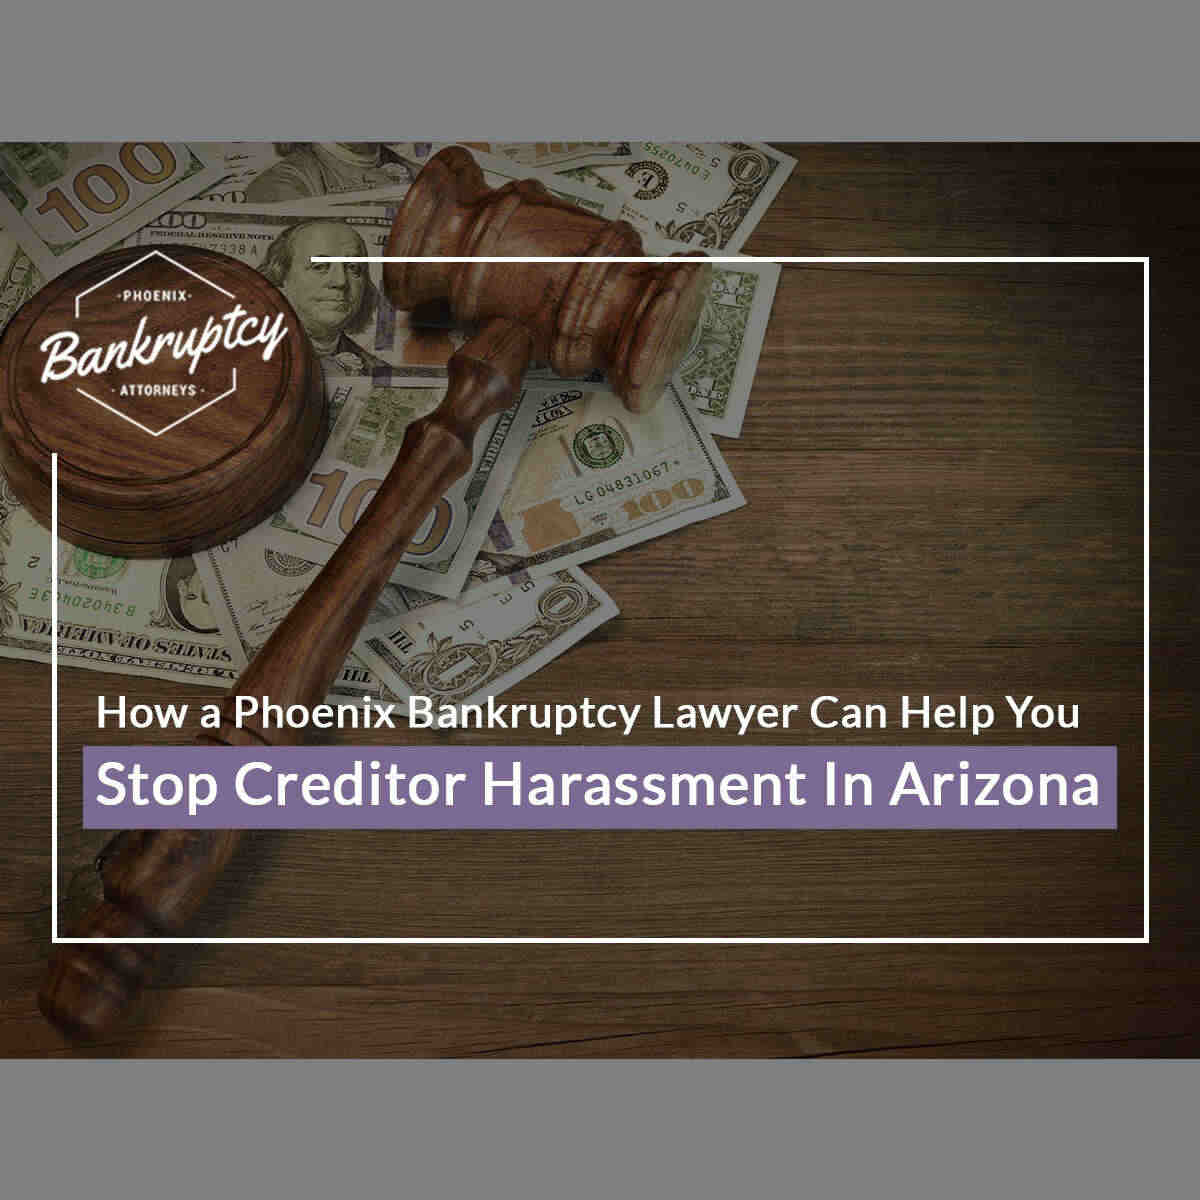 How a Phoenix Bankruptcy Lawyer Can Help You Stop Creditor Harassment In Arizona